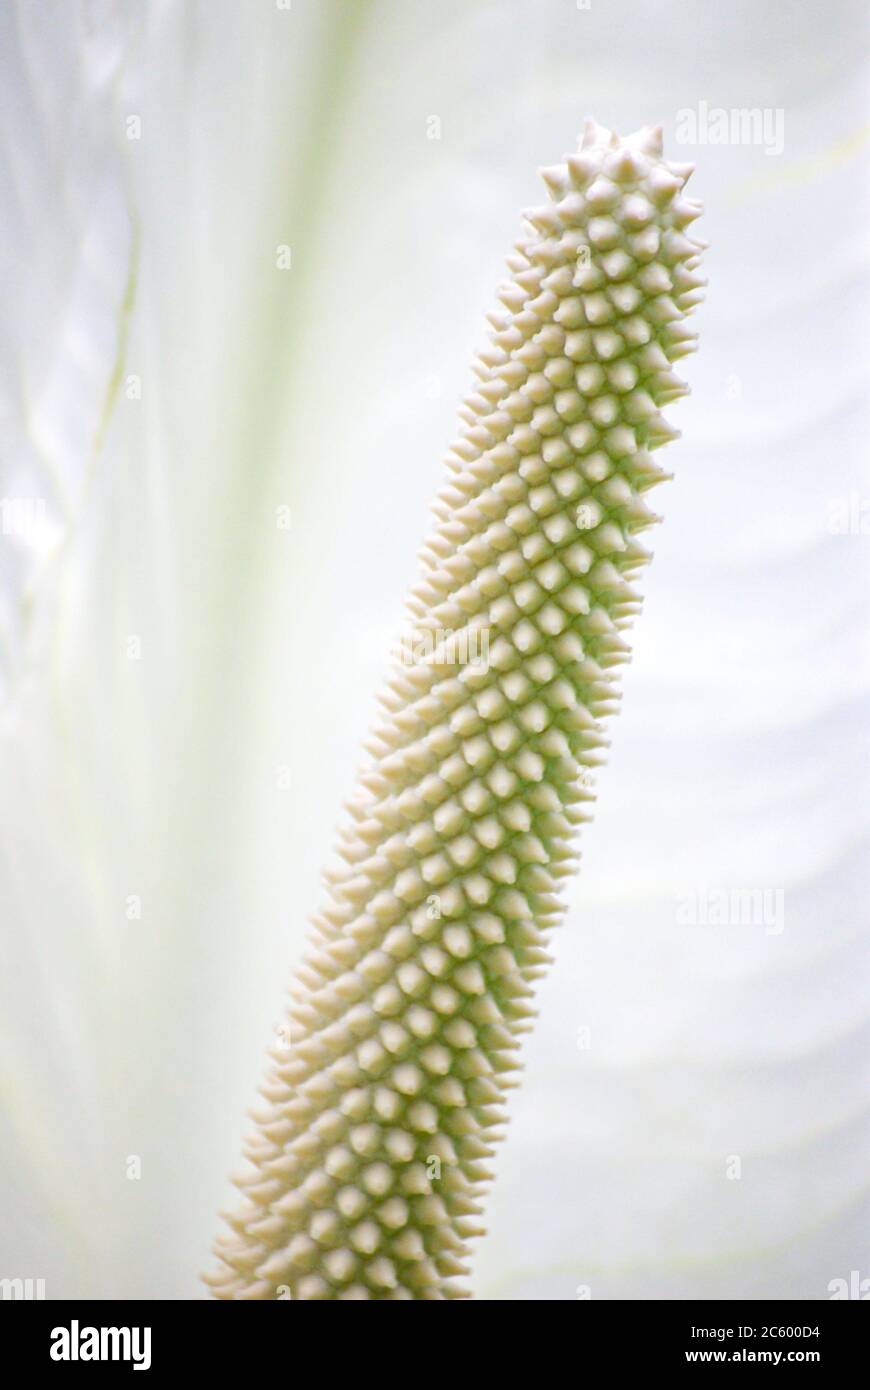 The rod-shaped inflorescence of an Arum from the Arum family. Stock Photo